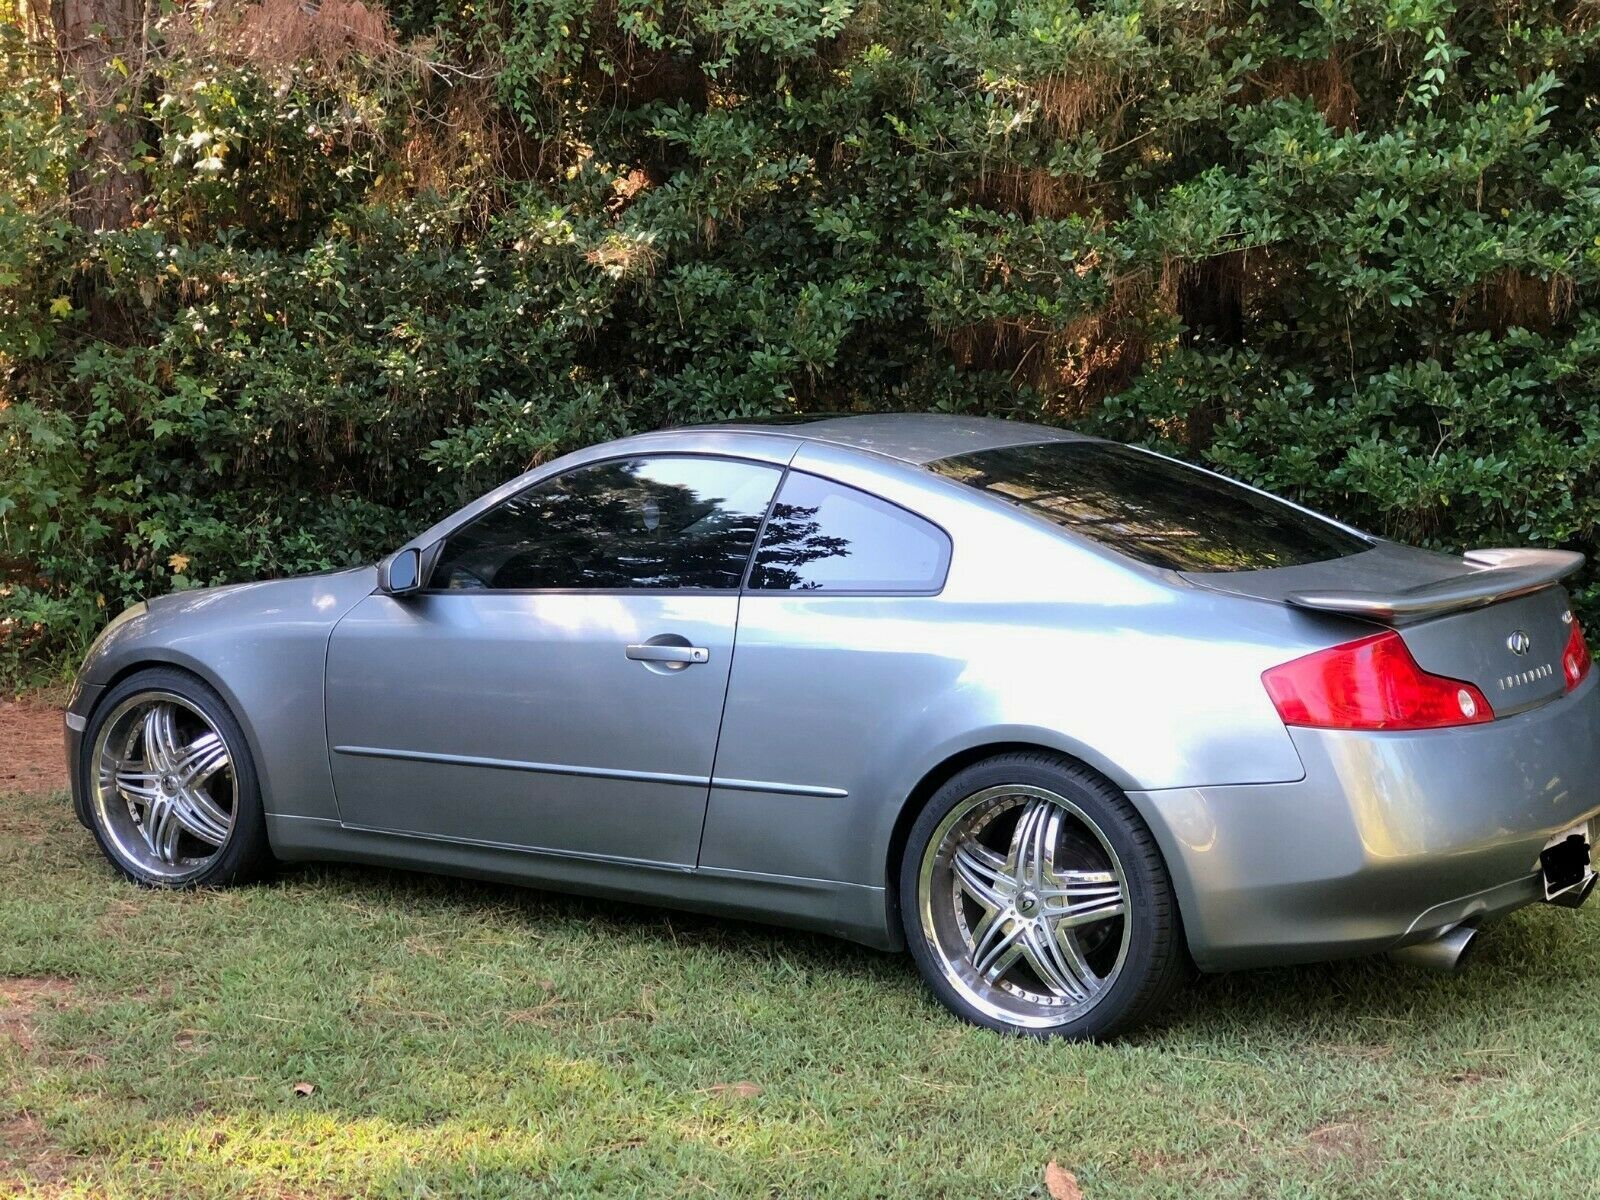 Used 2004 Infiniti G35 2004 Infiniti G35 Coupe Fully loaded with 20 inch  Gianna wheels- No Reserve 2020 is in stock and for sale - Price & Review  2022 2023 | Infiniti, Coupe, Colorful interiors